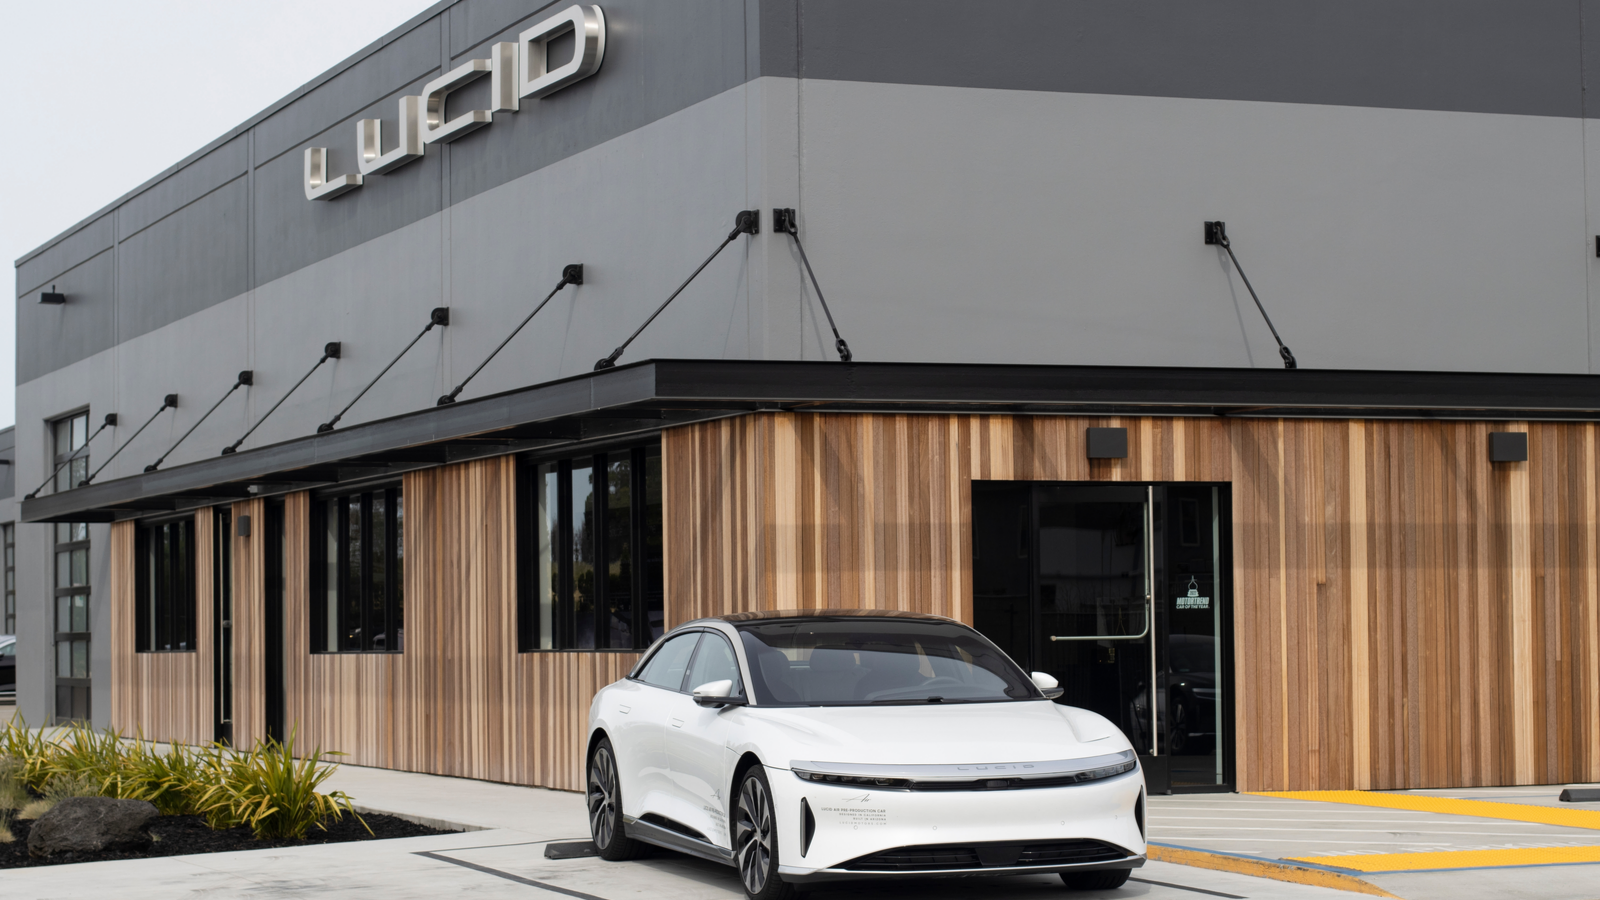 A Lucid Air pre production electric car is seen at a Lucid showroom in Millbrae, California. LCID stock.